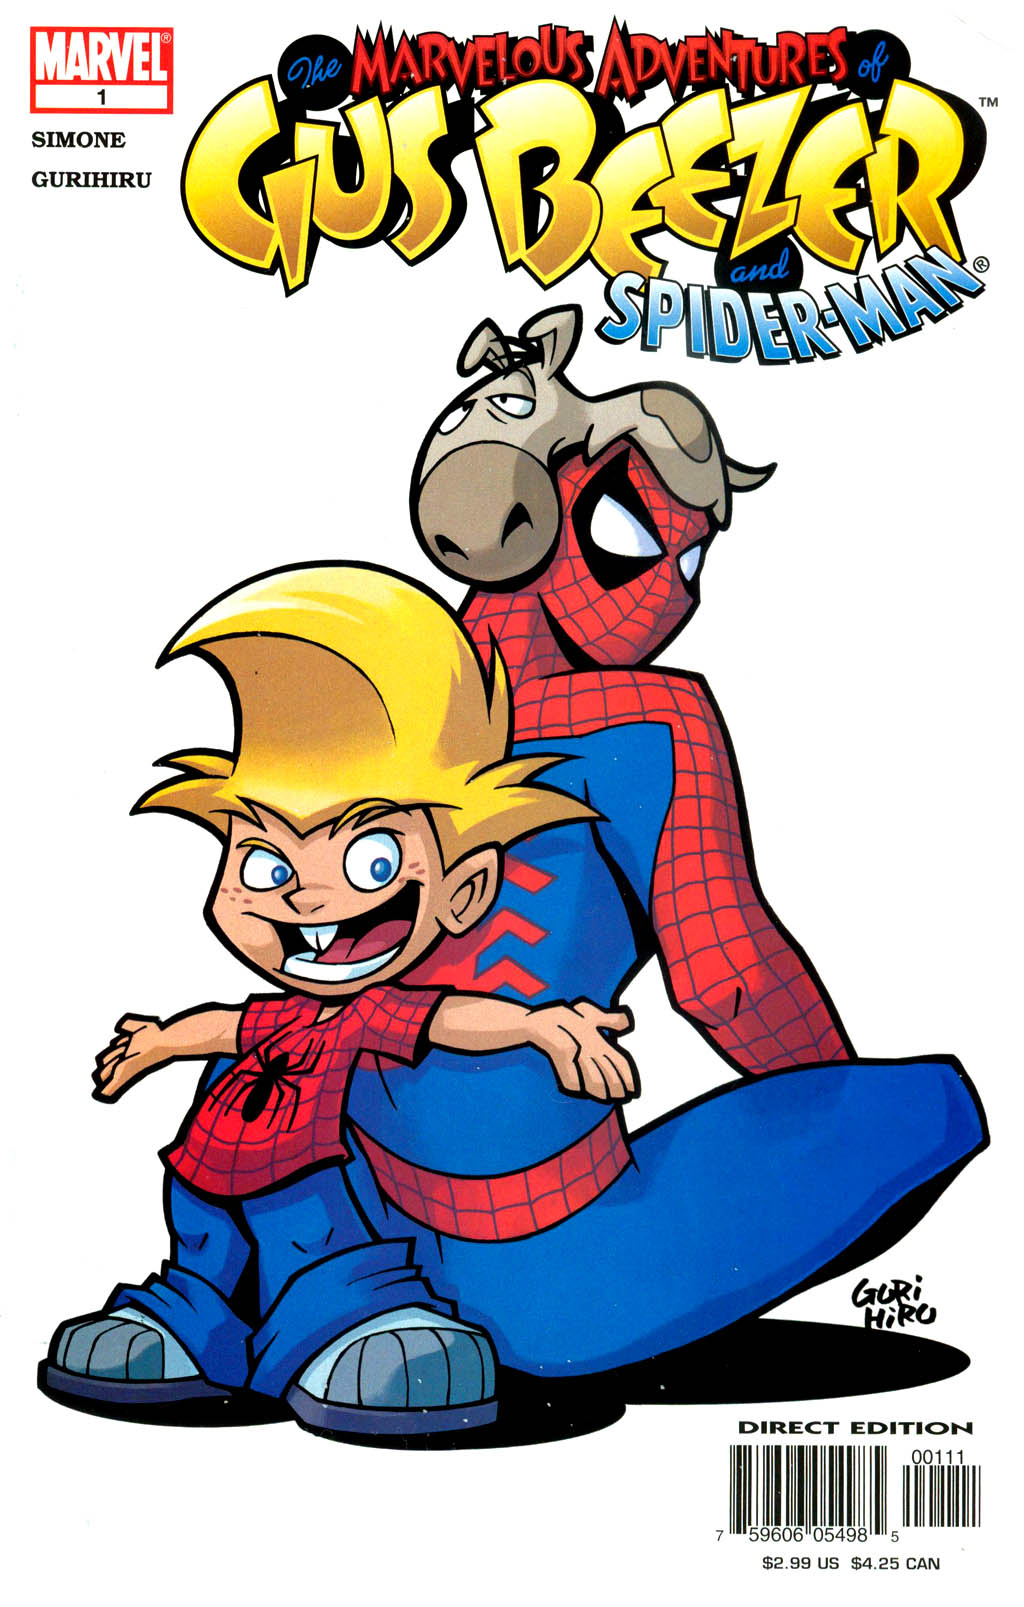 1024px x 1607px - Marvelous Adventures Of Gus Beezer Gus Beezer And Spider Man | Read  Marvelous Adventures Of Gus Beezer Gus Beezer And Spider Man comic online  in high quality. Read Full Comic online for